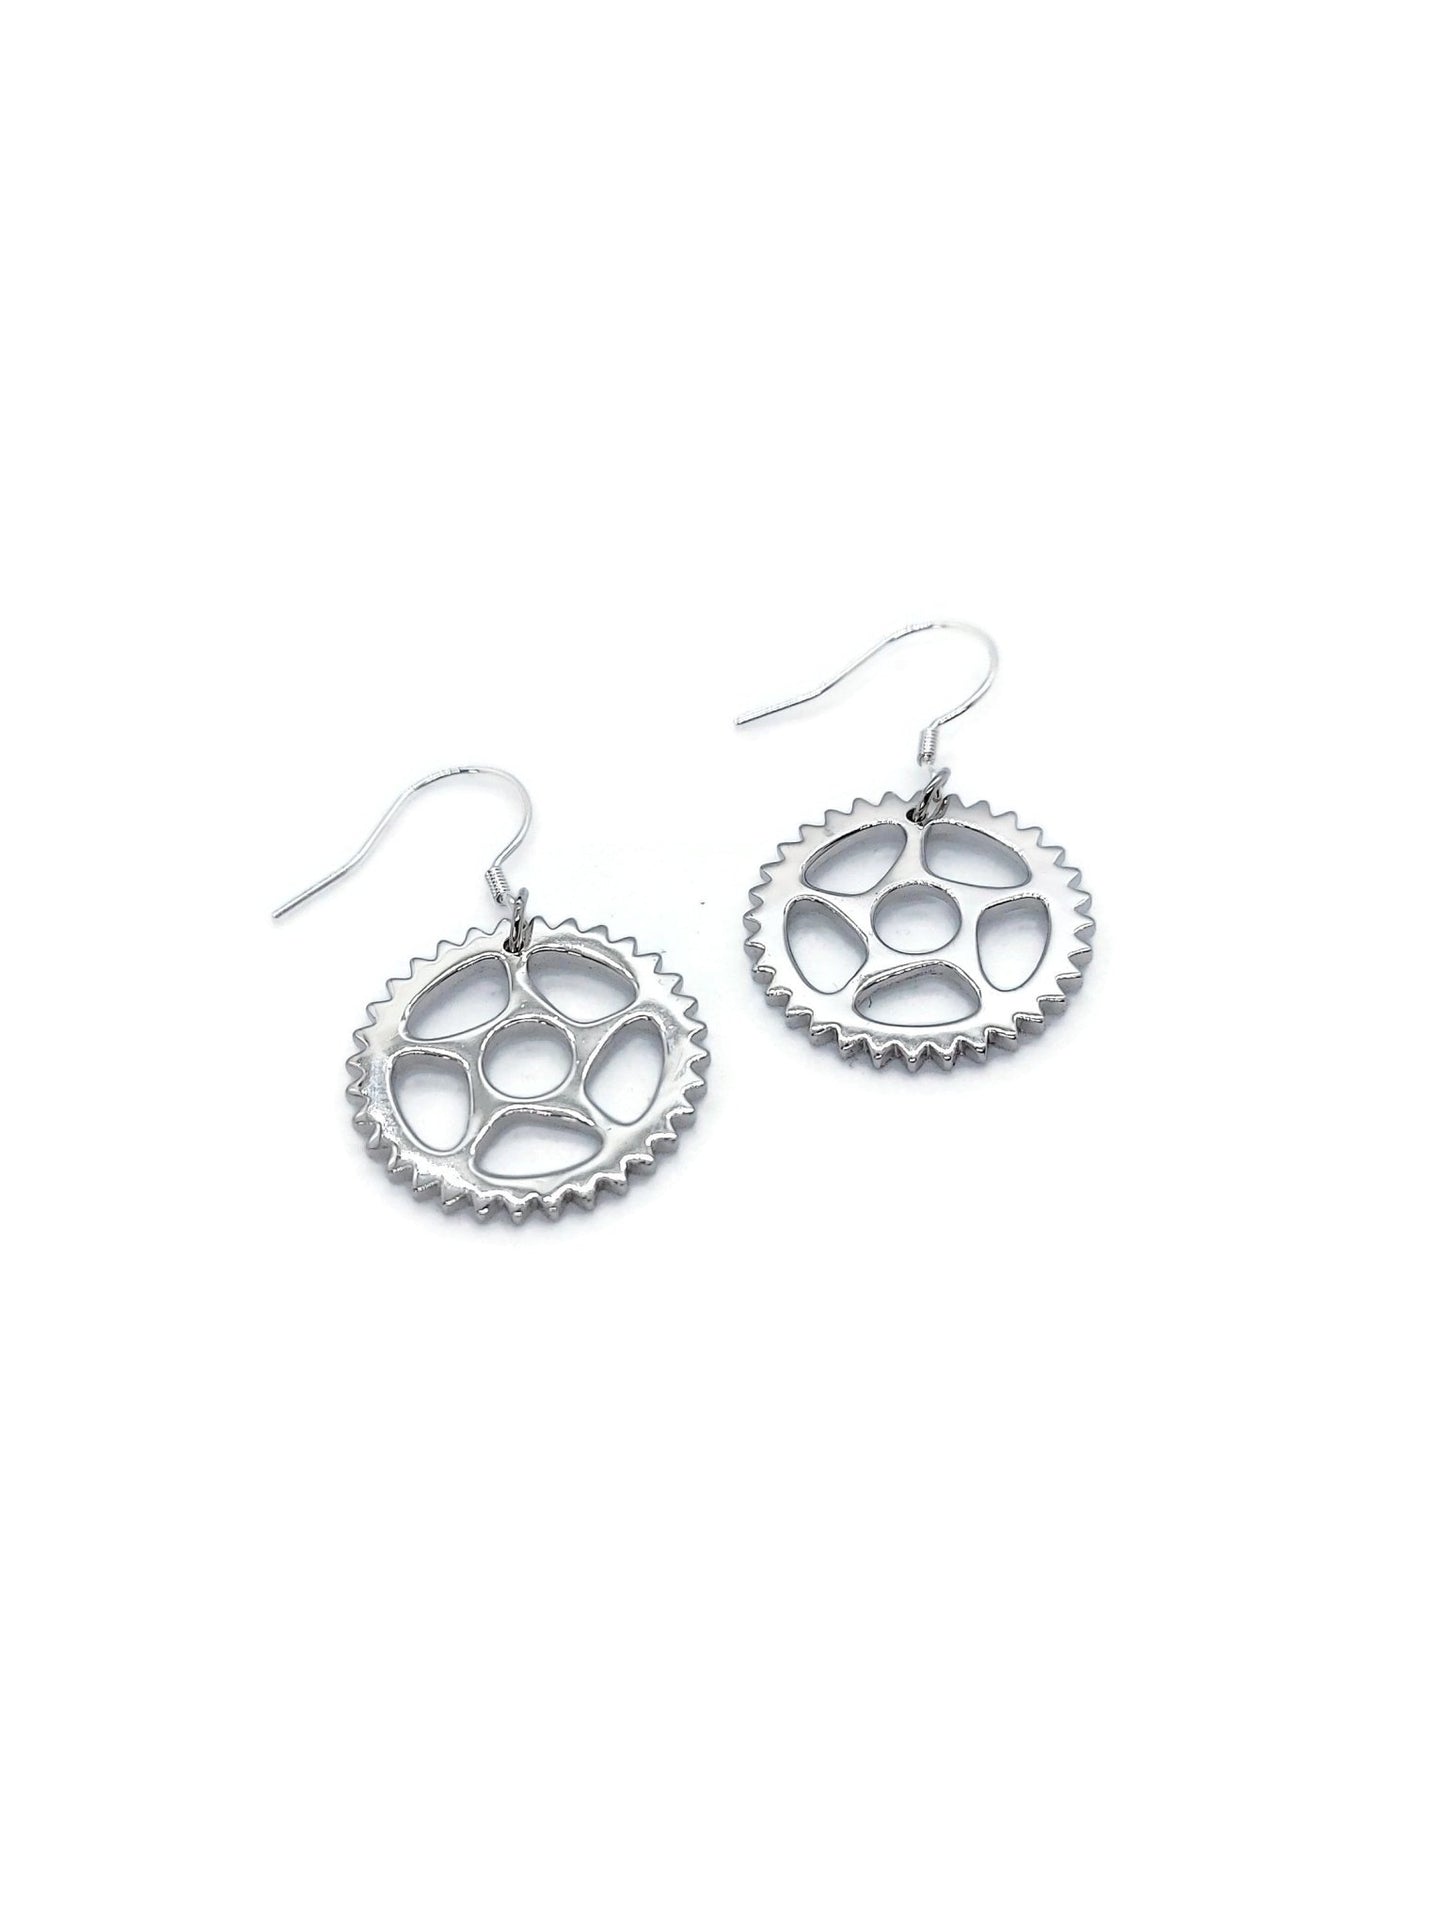 Rhodium Plated925 Sterling silver bike chain ring design dangle earrings with a white background